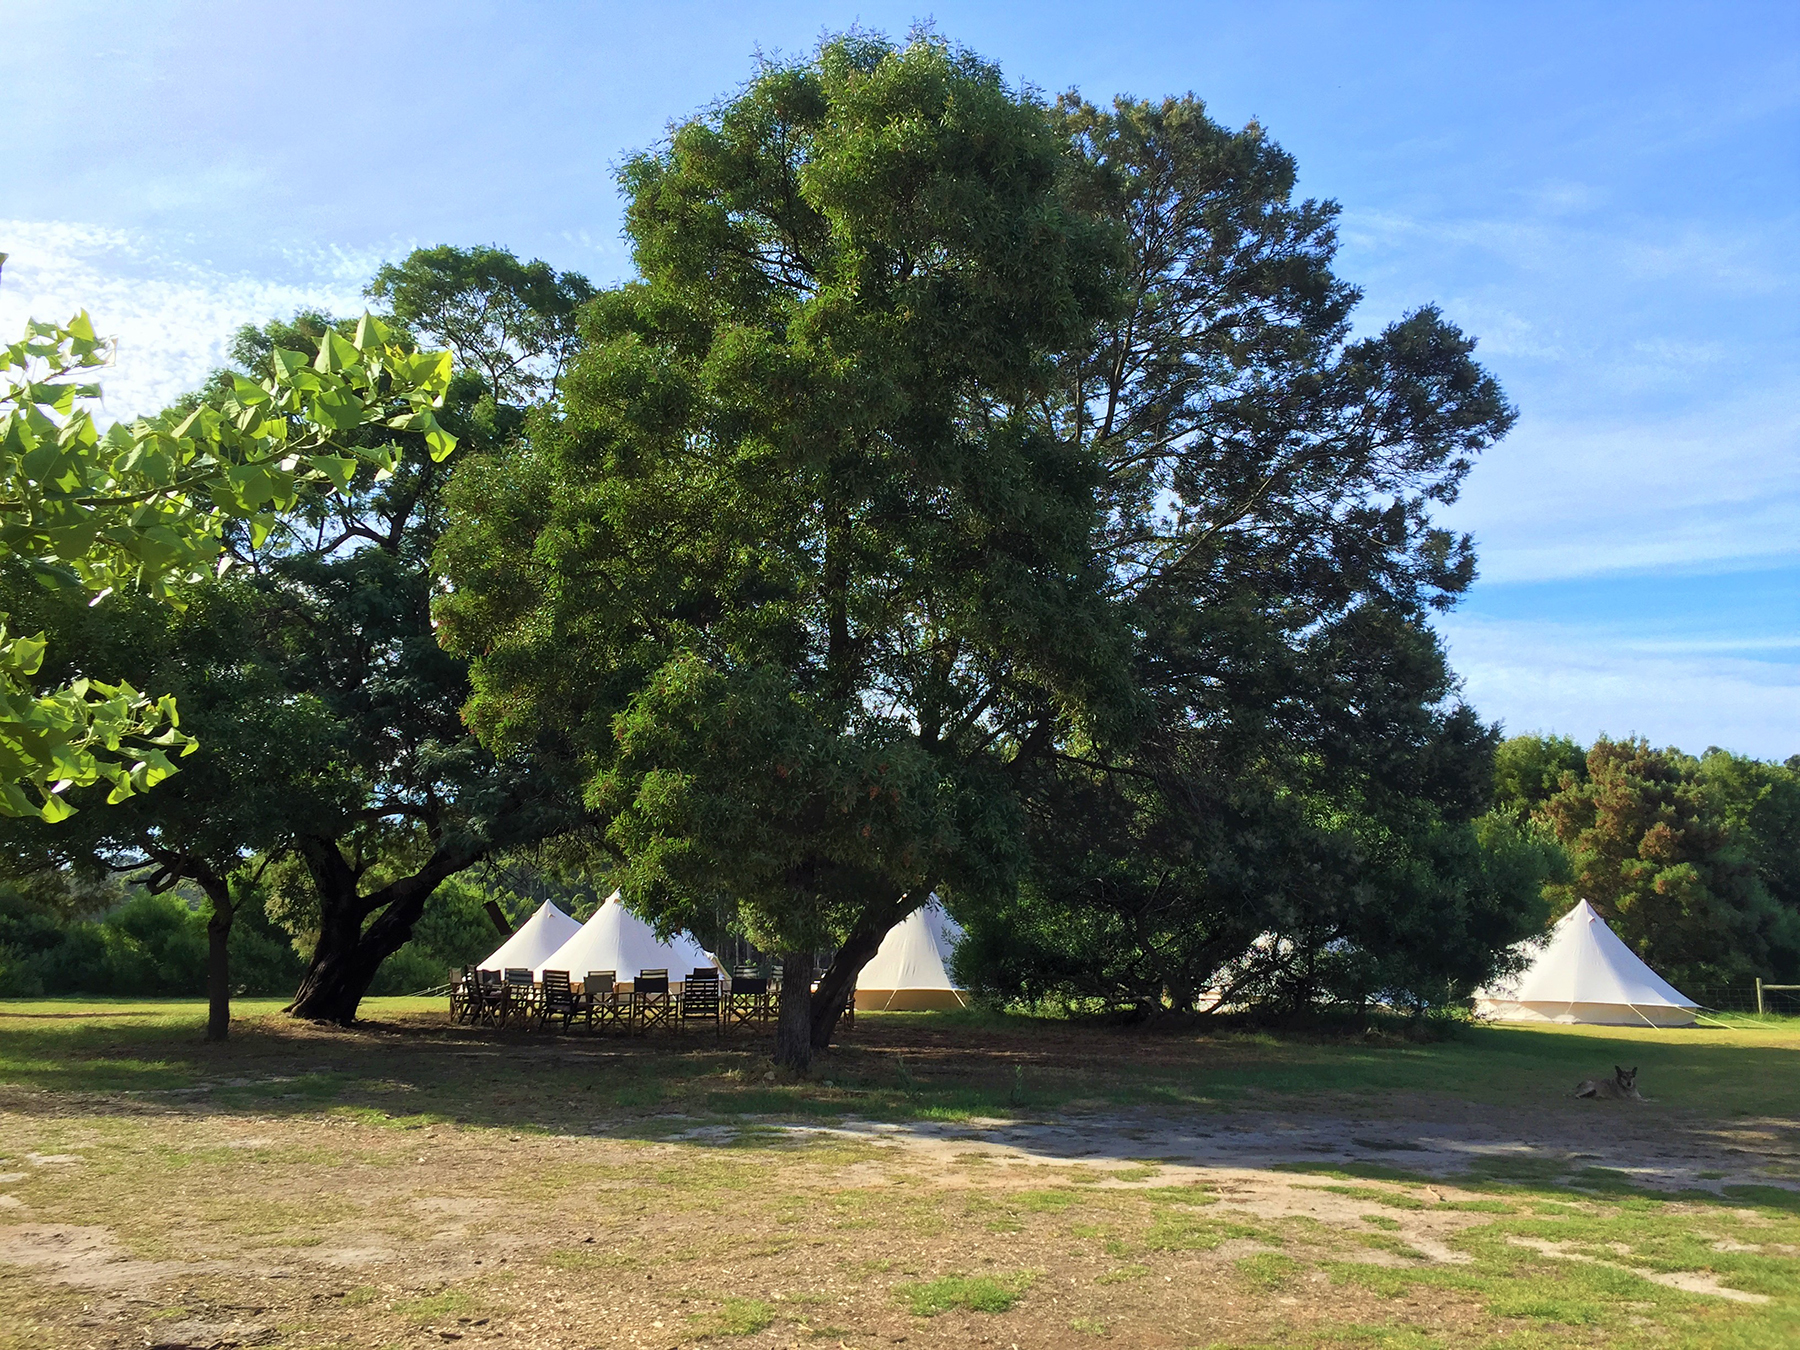 3-Day Margaret River Yoga Glamping Retreat Tour from Perth